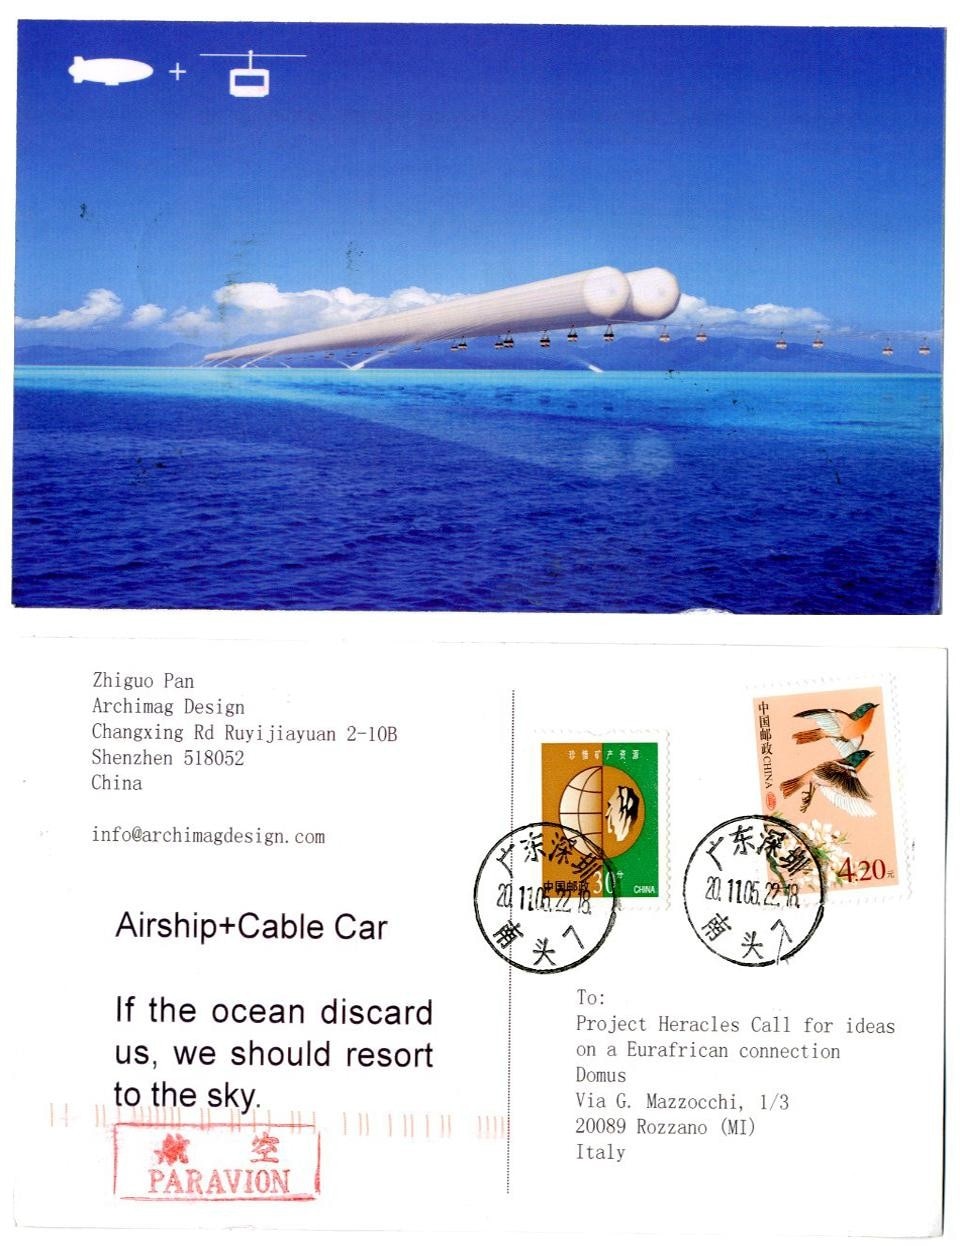 Top: The Duty Free Souk of Gibraltar. Oliver Wainwright (UK). Above: Airship + Cable Car. If the ocean discard us, we should resort to the sky. Zhiguo Pan (China).